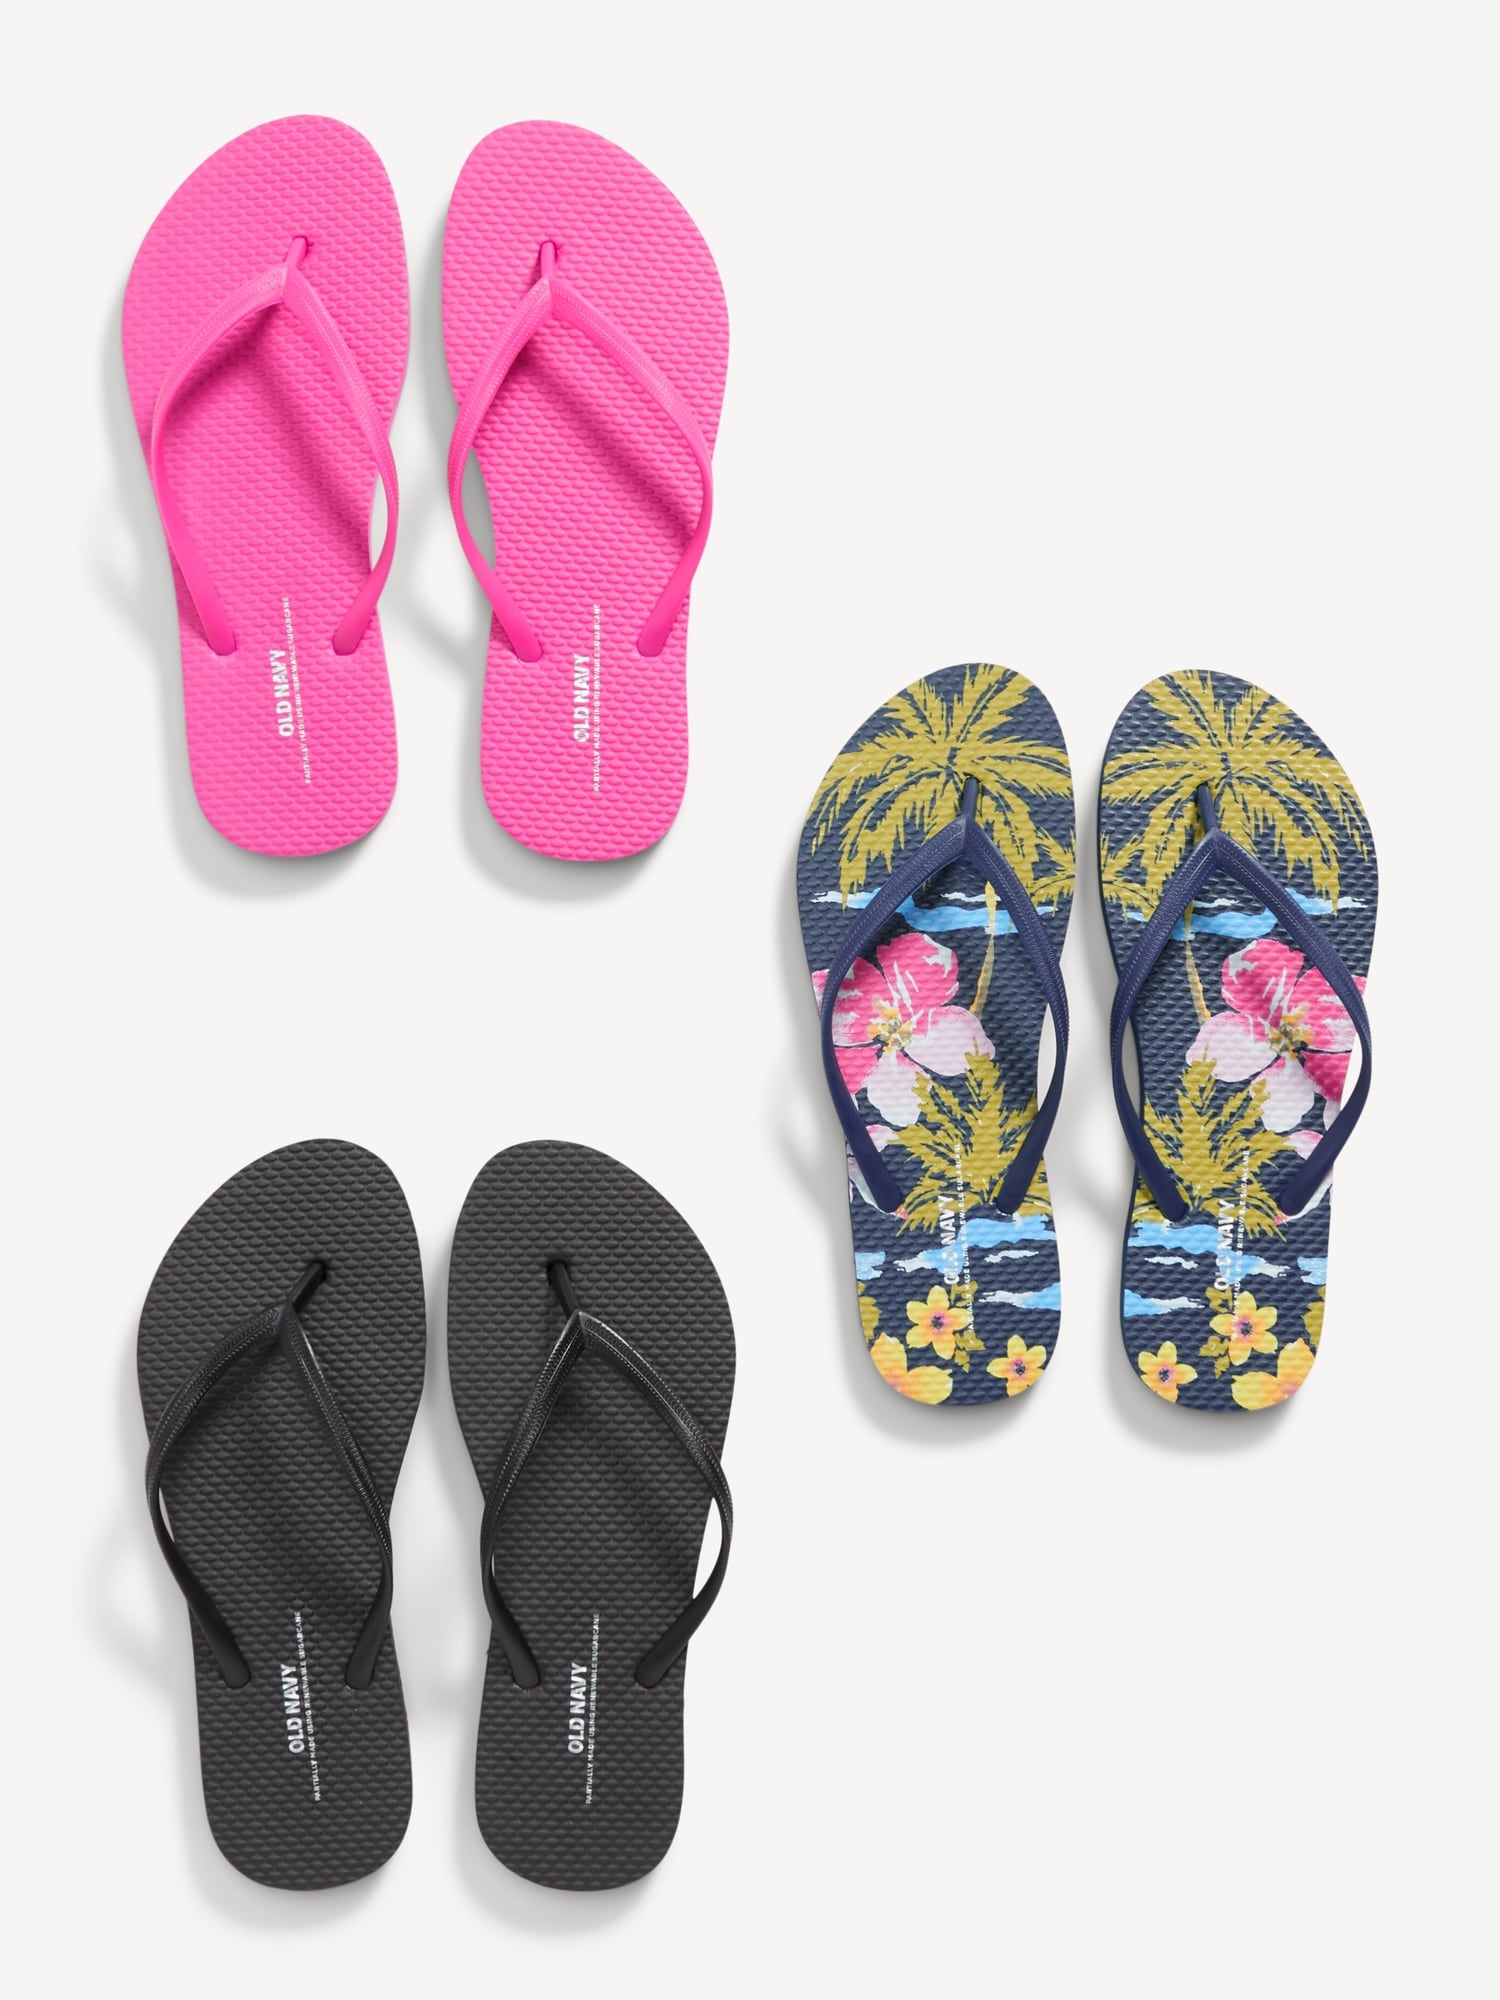 Old Navy Woman Flip Flops Sandals Summer Beach Size 6,7,8,9,10,and 11 Brand  NEW